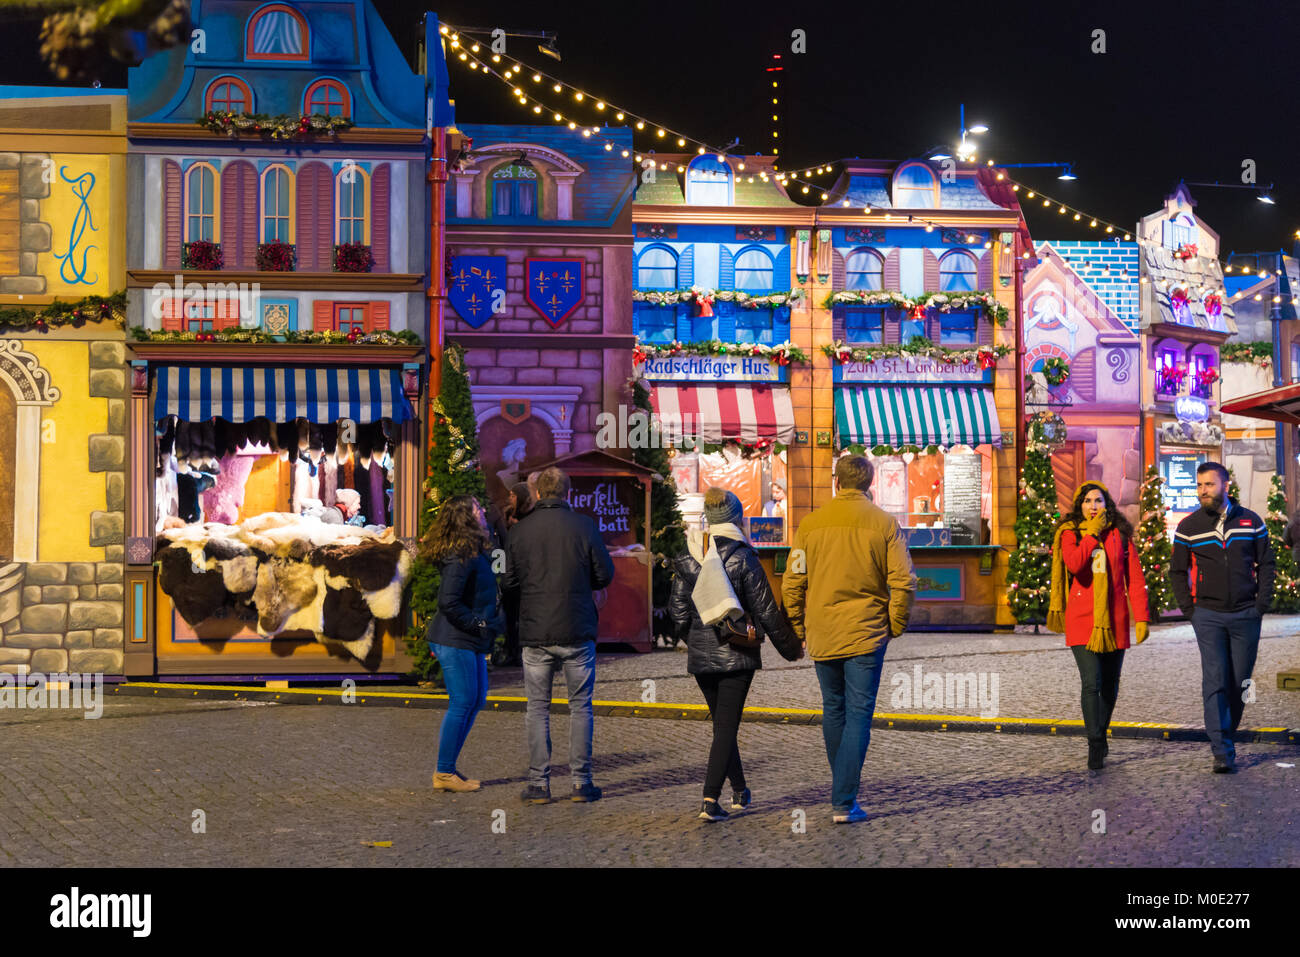 Dusseldorf, Germany - December 1, 2017 : Christmas market in the city of Dusseldorf, an international business and financial centre Stock Photo